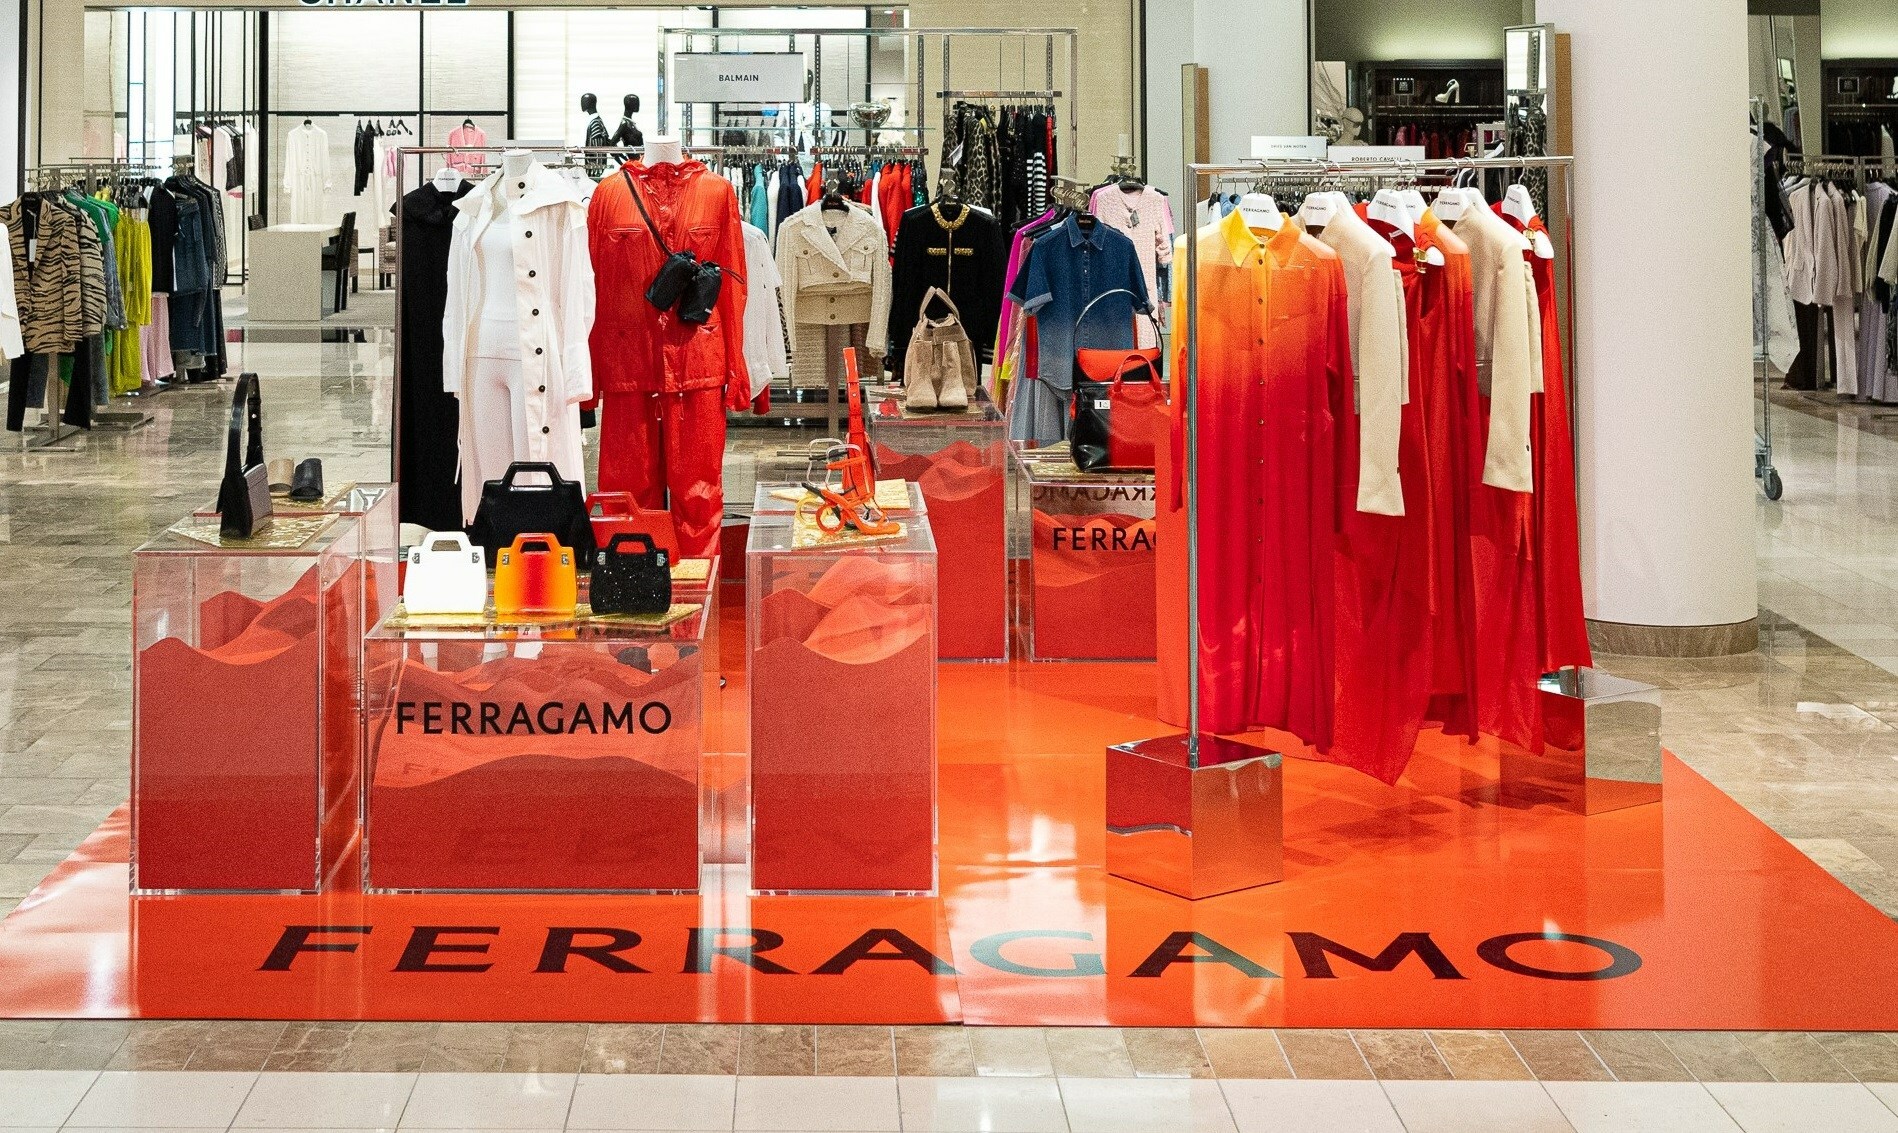 Neiman Marcus Expands to New Categories, Offering Exclusive Product and In- Store Activations with Ferragamo for Luxury Customers - Mar 13, 2023